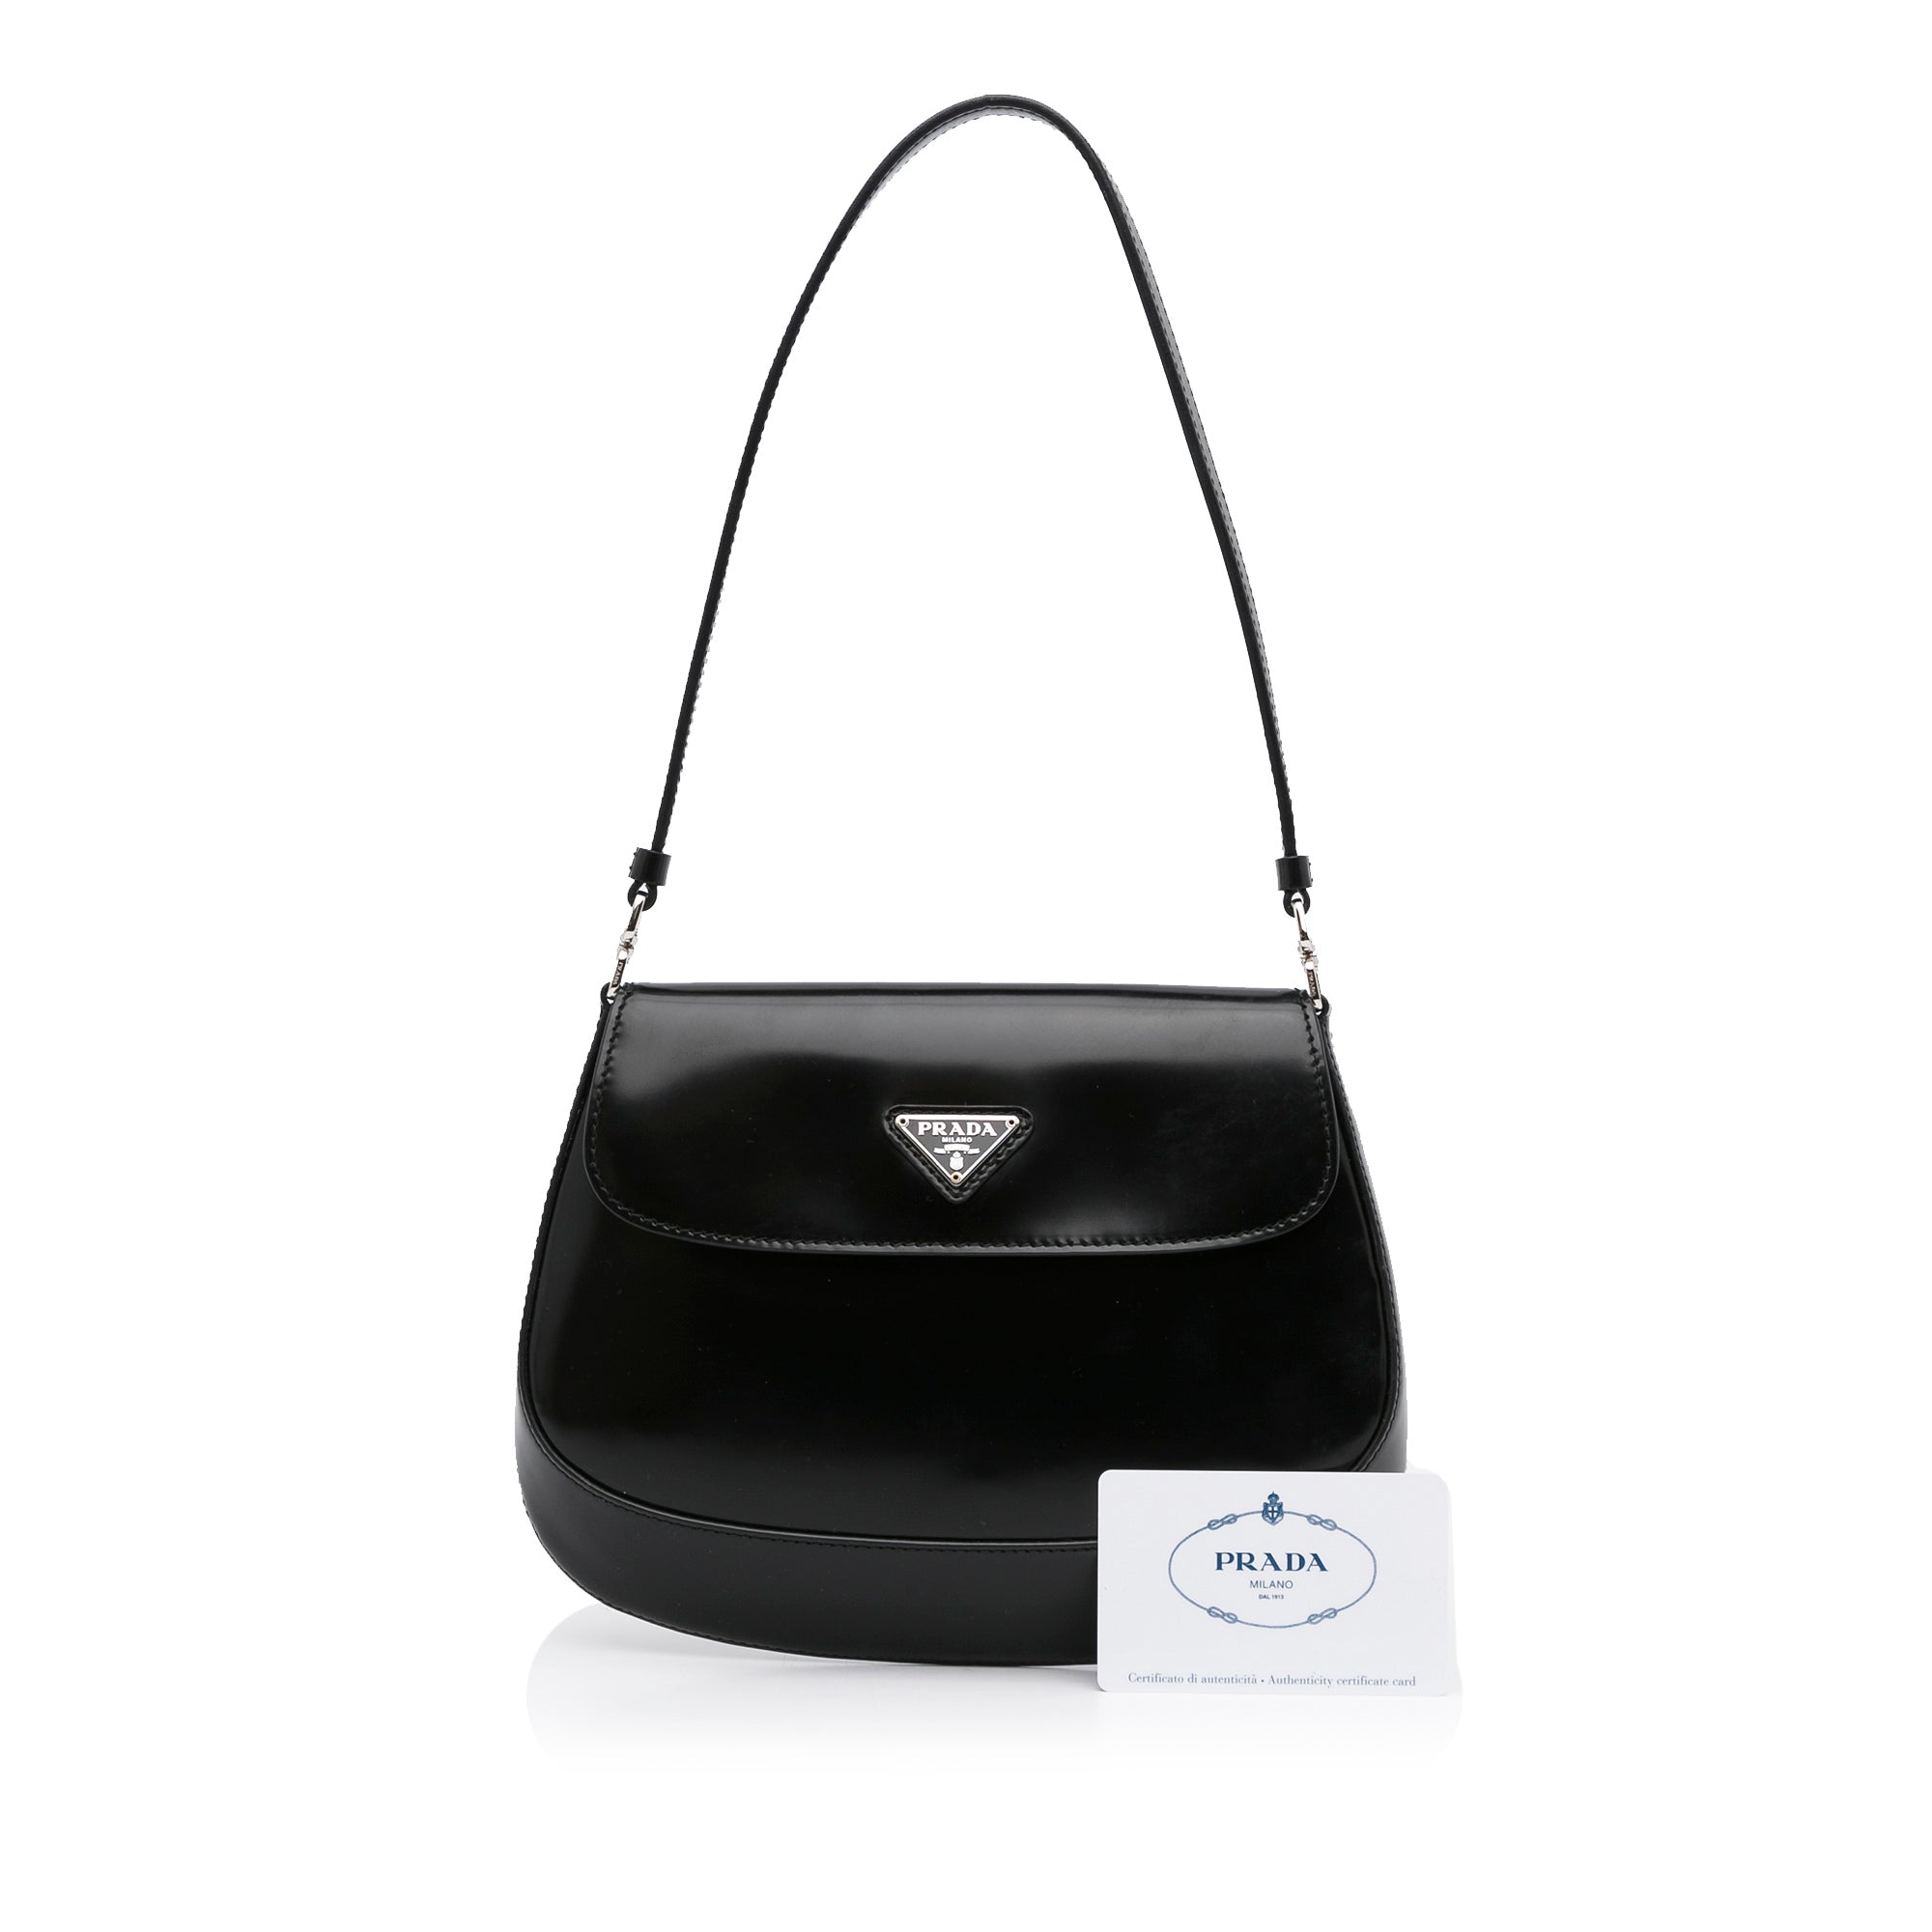 Cleo Small Leather Shoulder Bag in White - Prada